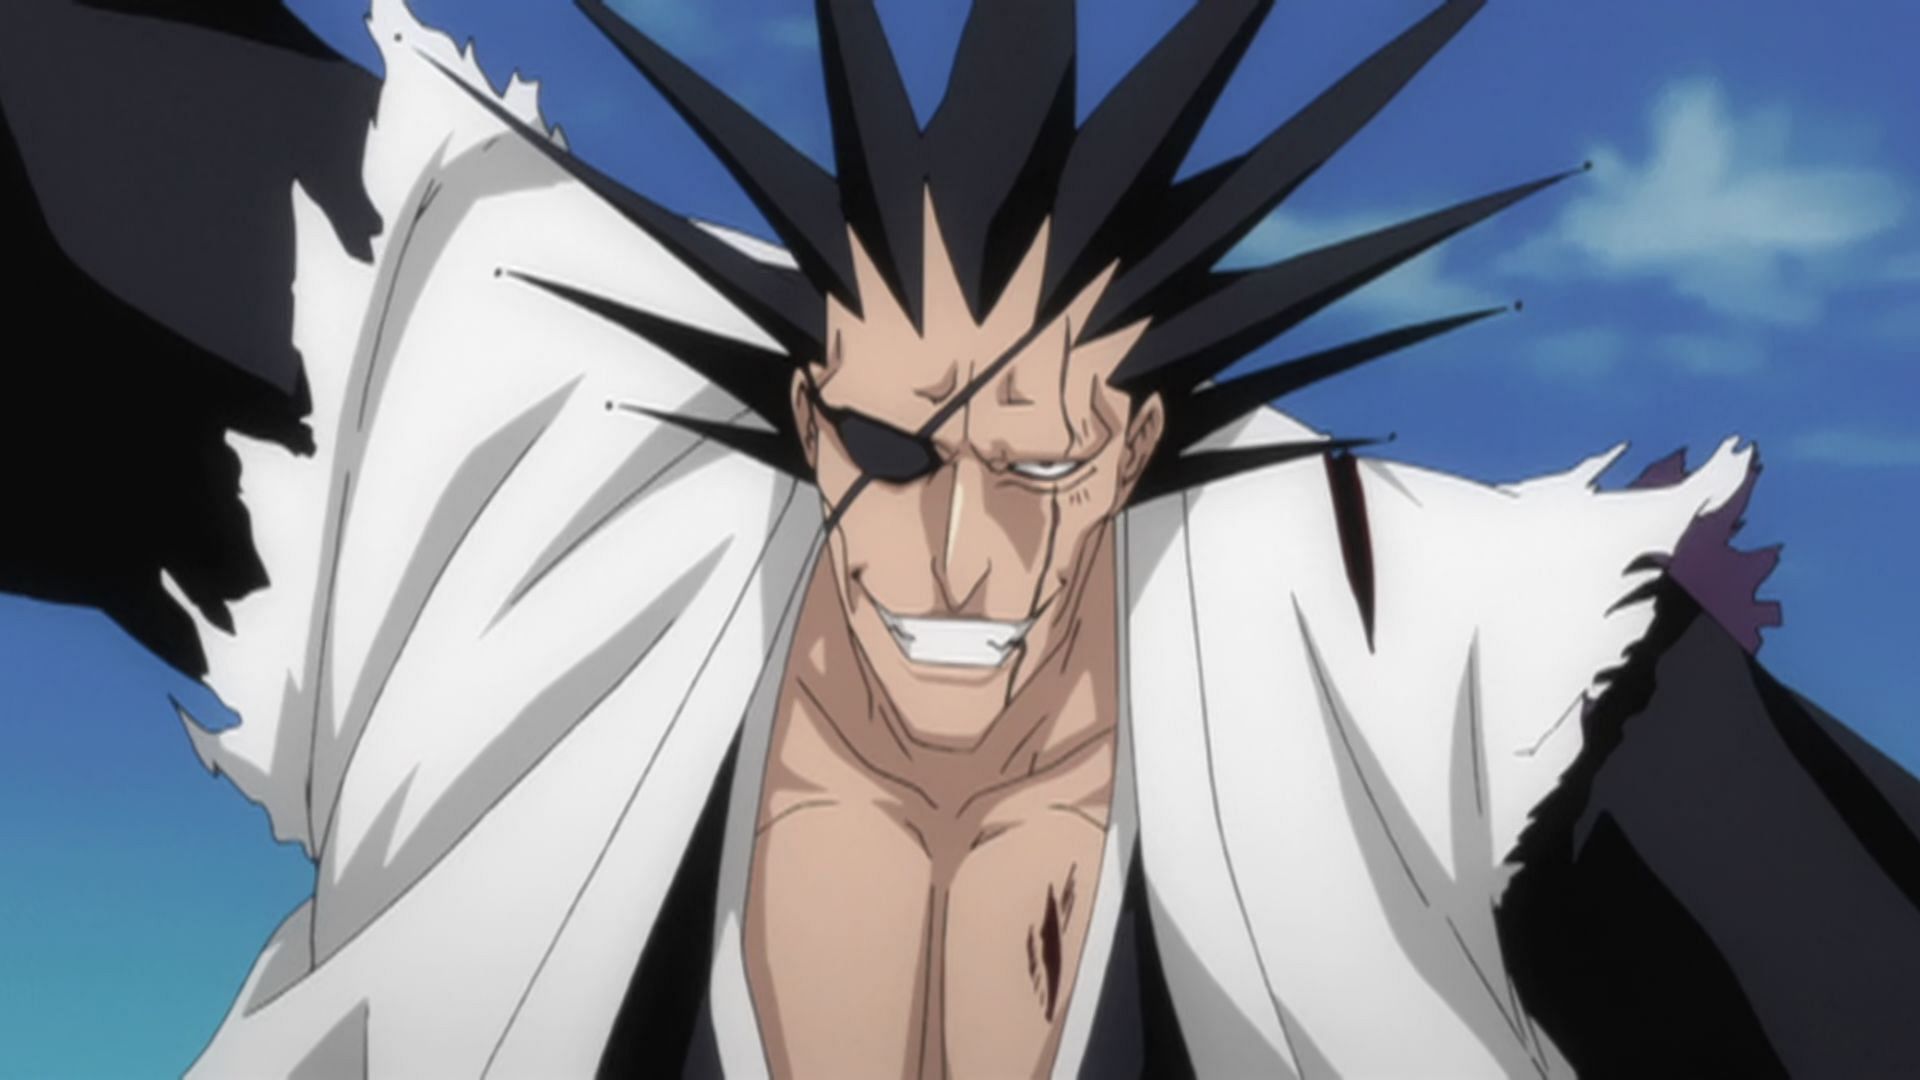 Kenpachi has perfect example of spiky hair in anime (Image via Pierrot)